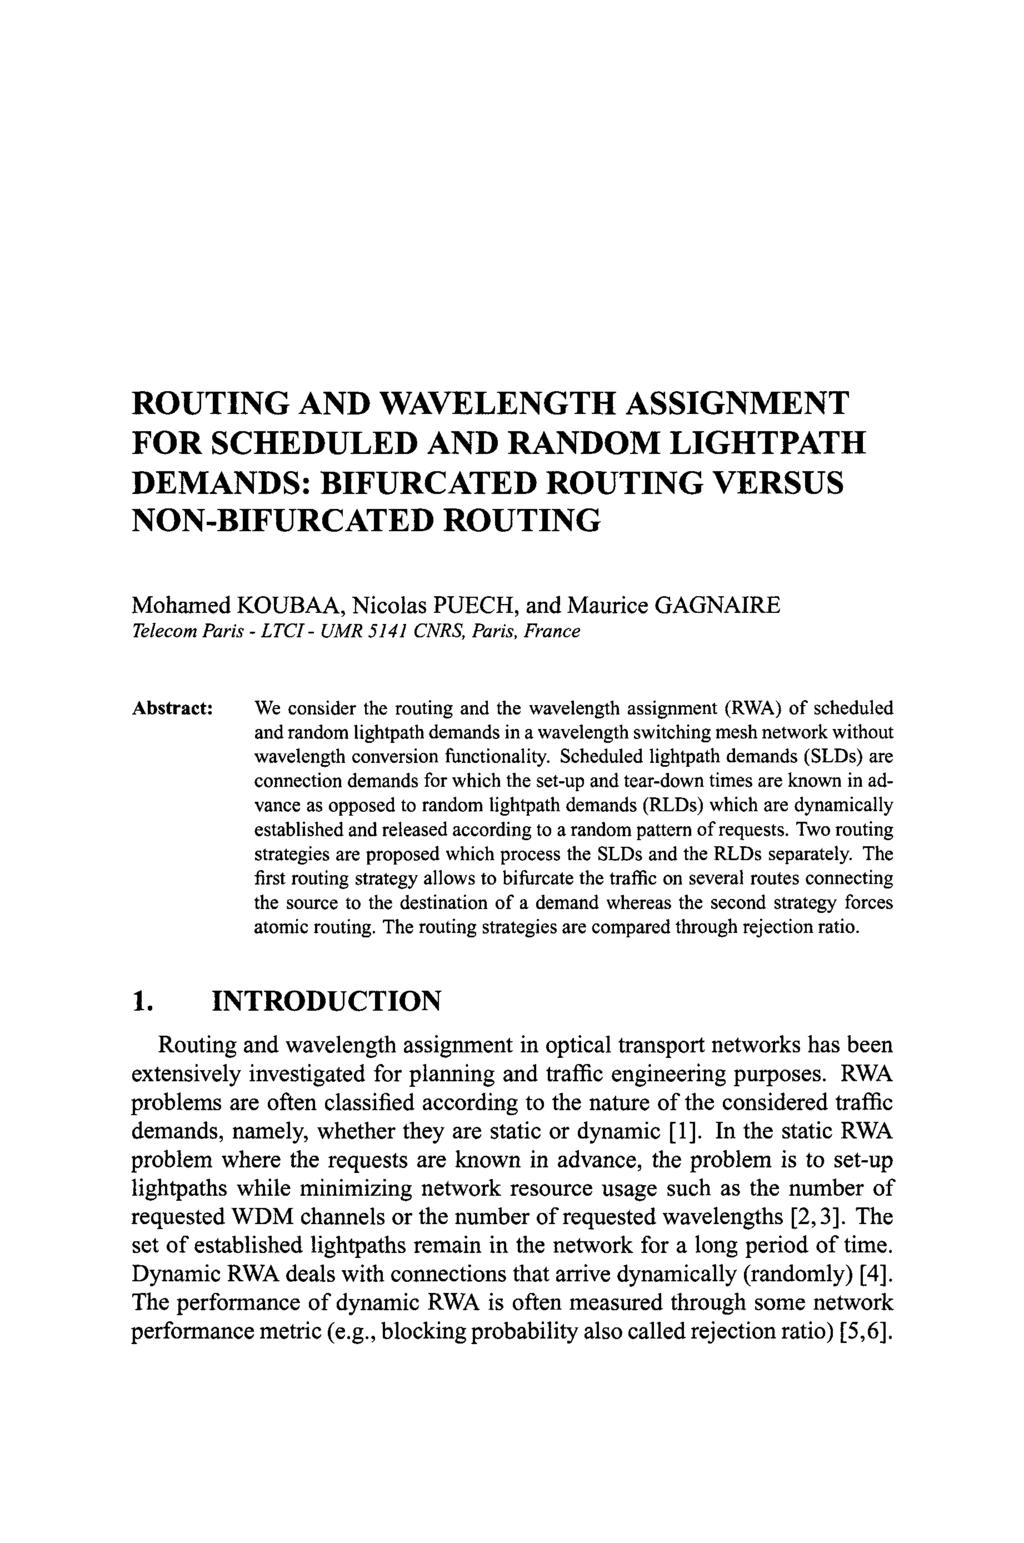 ROUTING AND WAVELENGTH ASSIGNMENT FOR SCHEDULED AND RANDOM LIGHTPATH DEMANDS: BIFURCATED ROUTING VERSUS NON-BIFURCATED ROUTING Mohamed KOUBAA, Nicolas PUECH, and Maurice GAGNAIRE Telecom Paris - LTCI